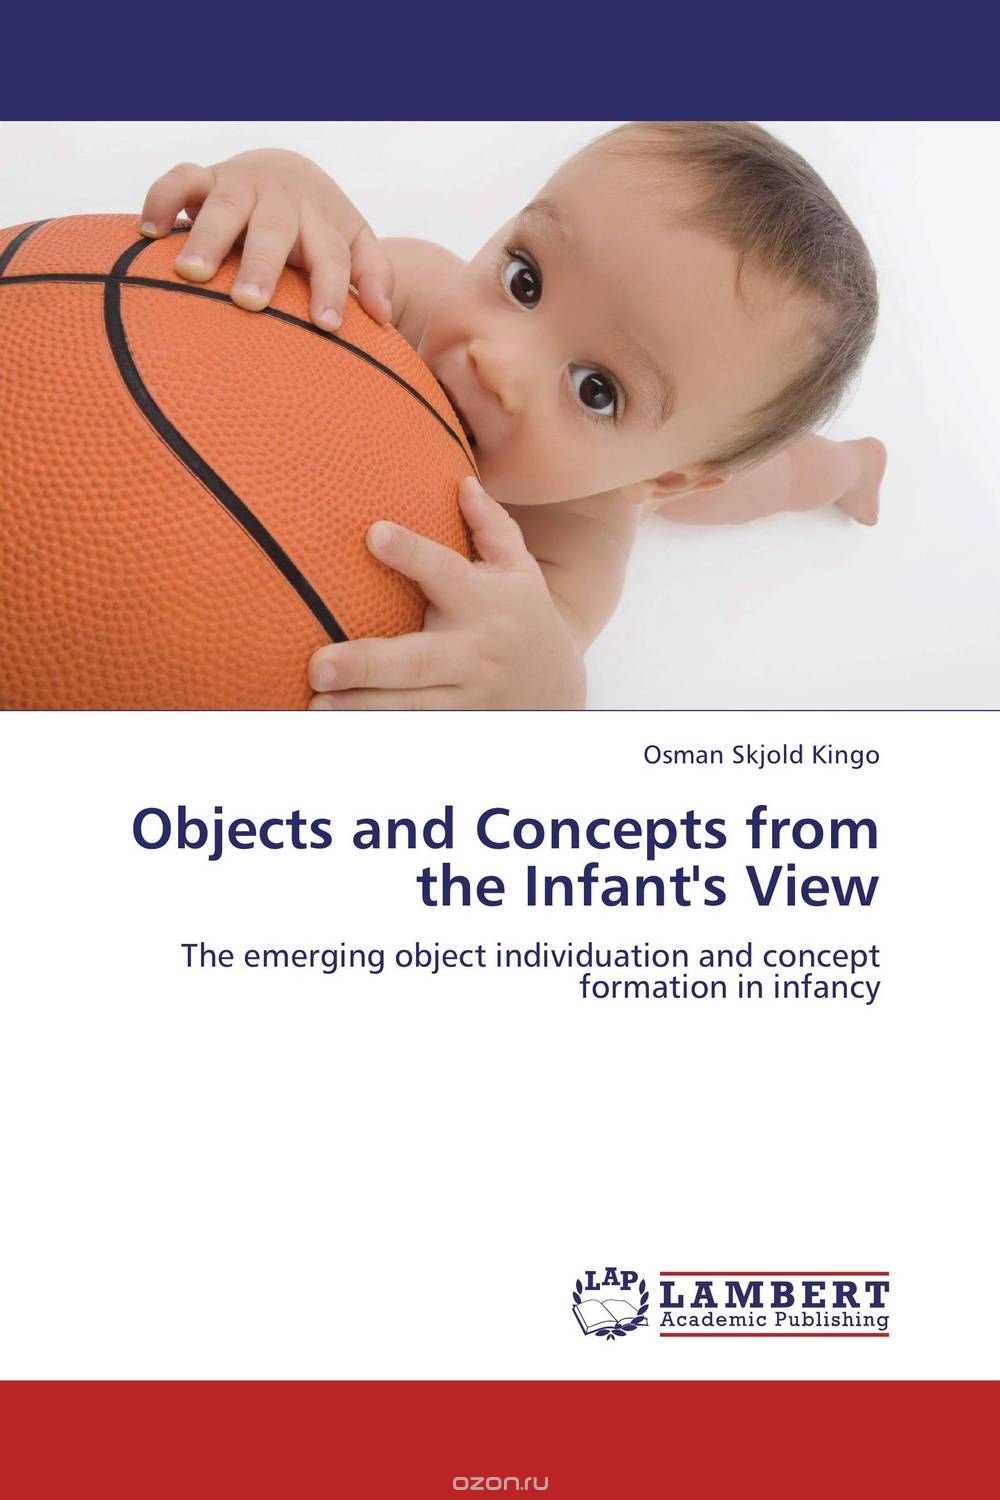 Скачать книгу "Objects and Concepts from the Infant's View"